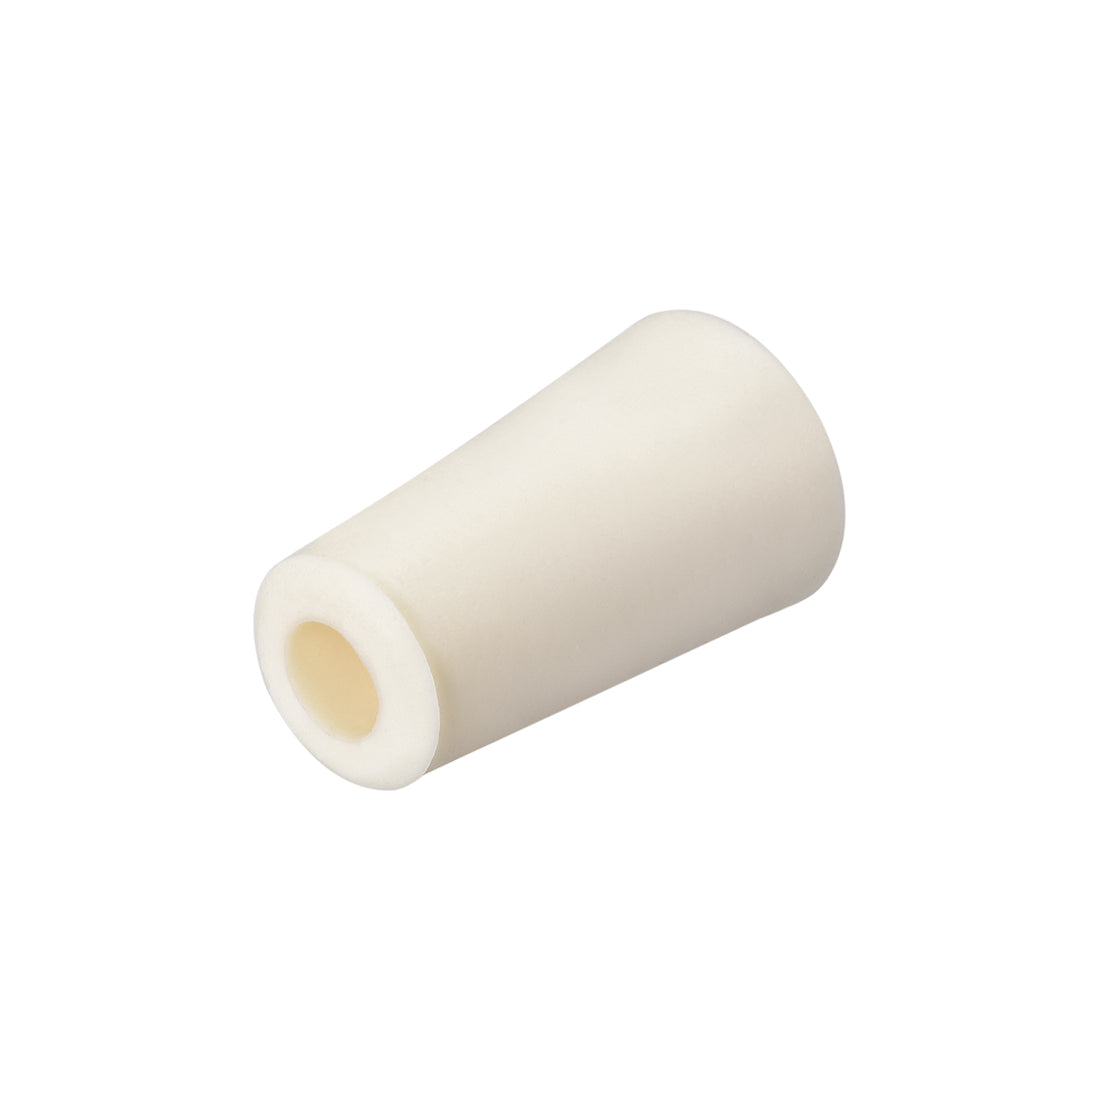 uxcell Uxcell 17-22mm Beige Drilled Silicone Stopper Plugs for Flask Test Tube Stopper 2pcs